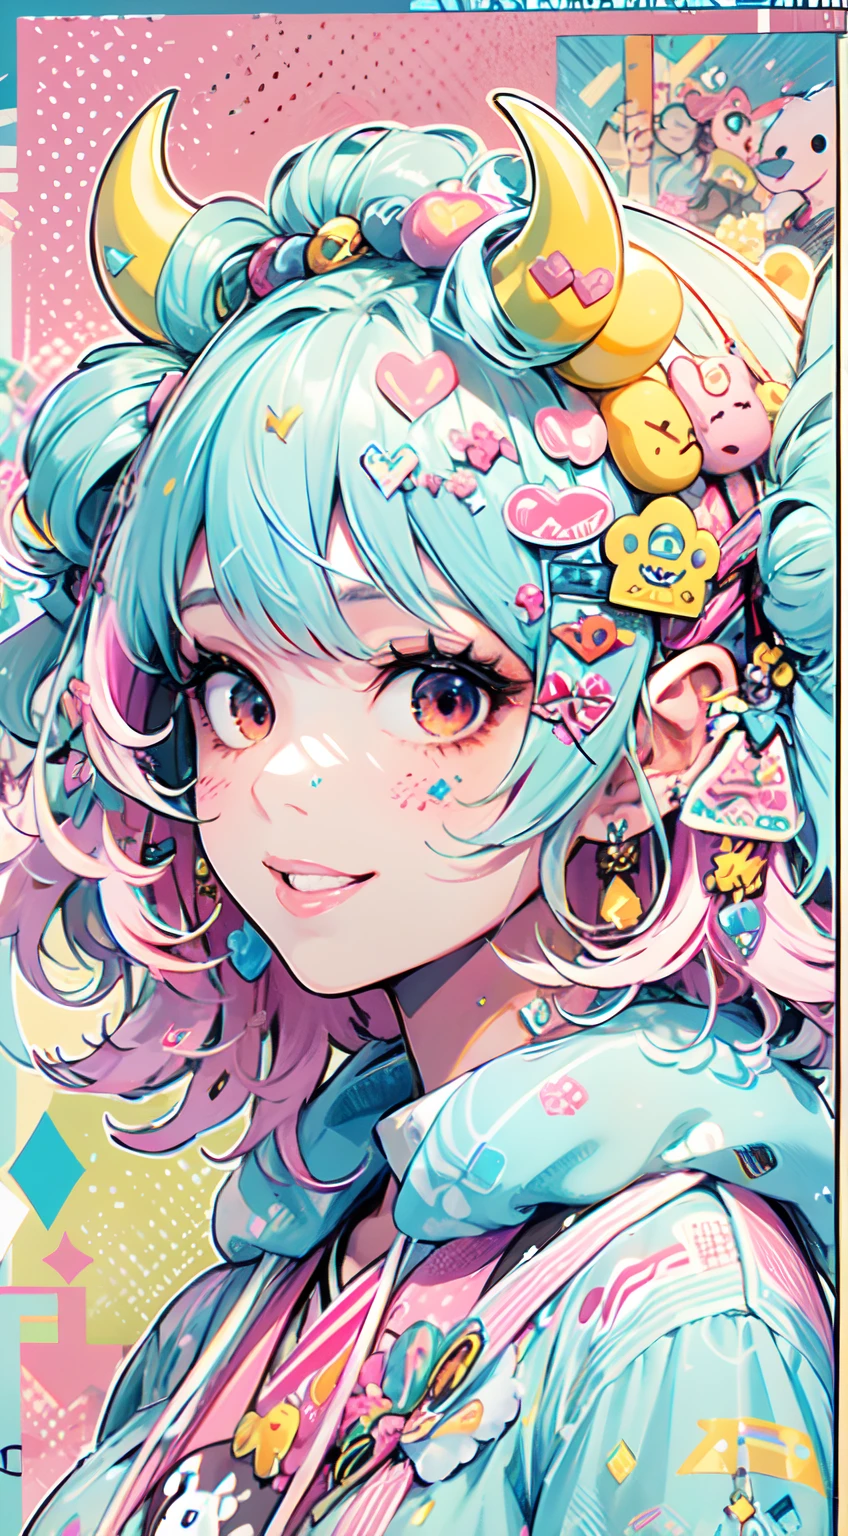 "kawaii, cute, adorable woman with pink, yellow, and baby blue color scheme. She is dressed in sky-themed clothes made out of clouds and sky motifs. Her outfit is fluffy and soft, with decora accessories like hairclips. She embodies the vibrant and trendy Harajuku fashion style." Short blue hair, red eyes, horns, demon wings, big ,big ass, big lips, juicy lips, huge hair, smile, bob cut, space buns, cloud hair ornament